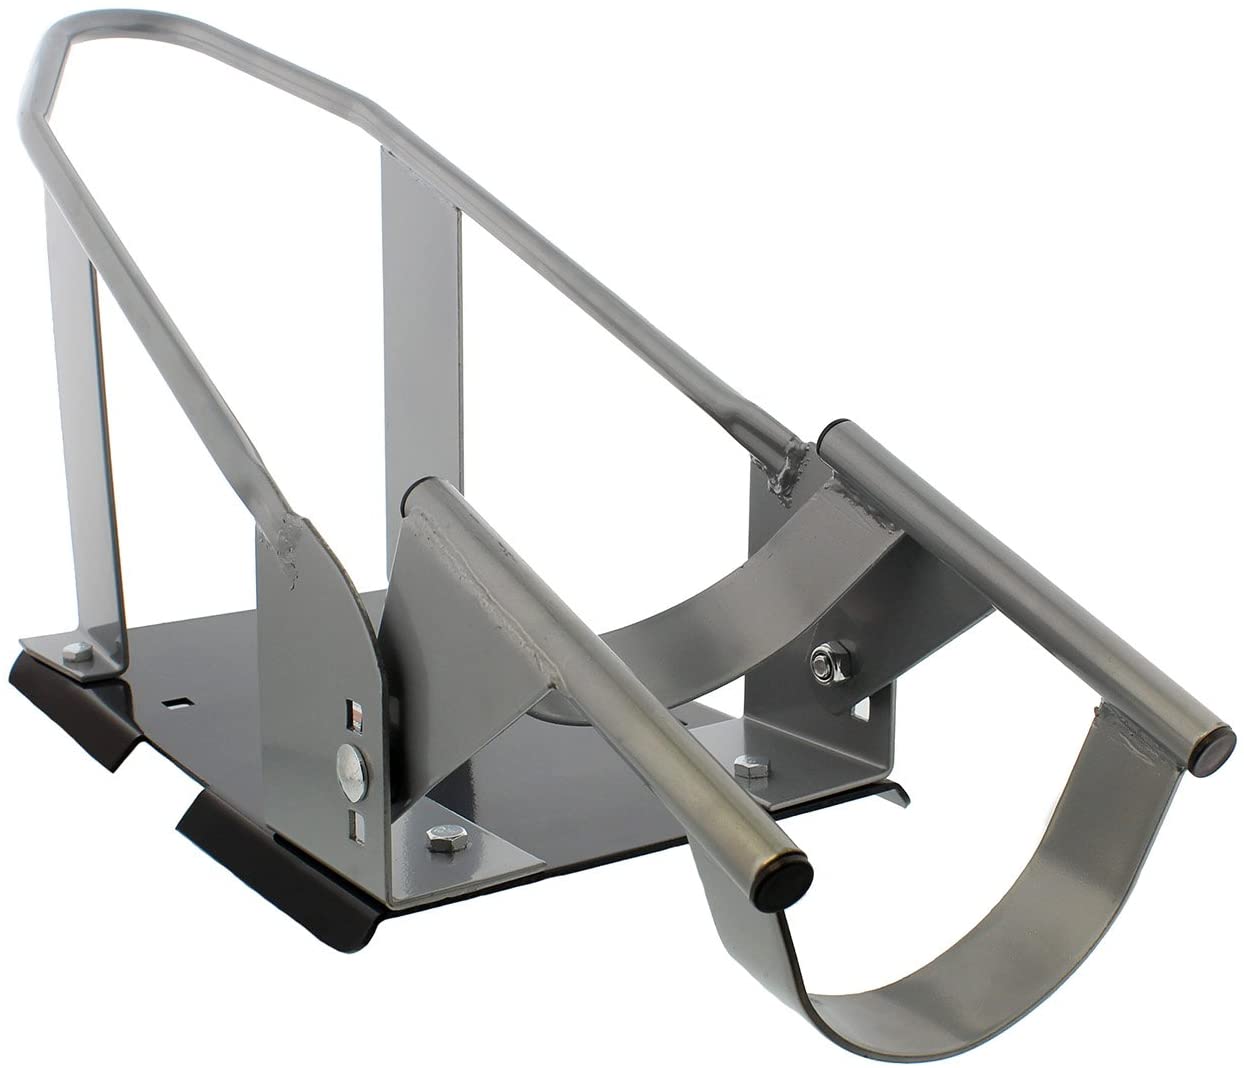 ABN Removable Trailer Wheel Chock